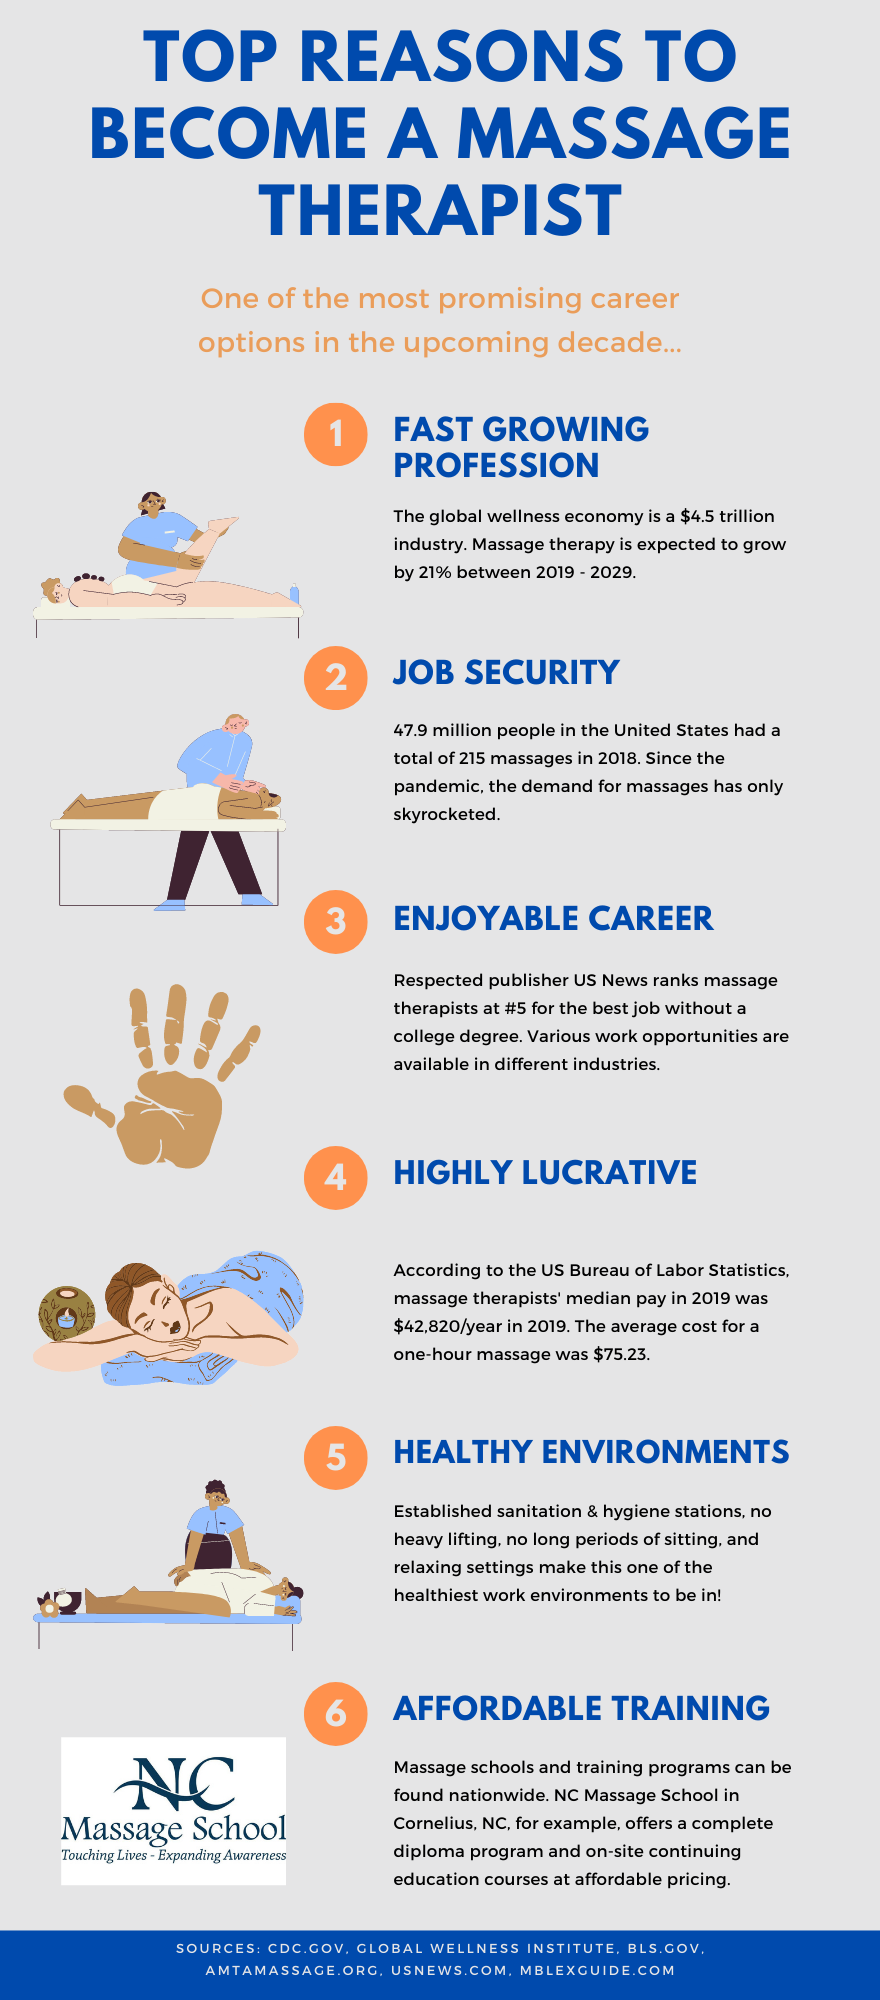 Top 6 Reasons To a Massage Therapist [Infographic] NC Massage School